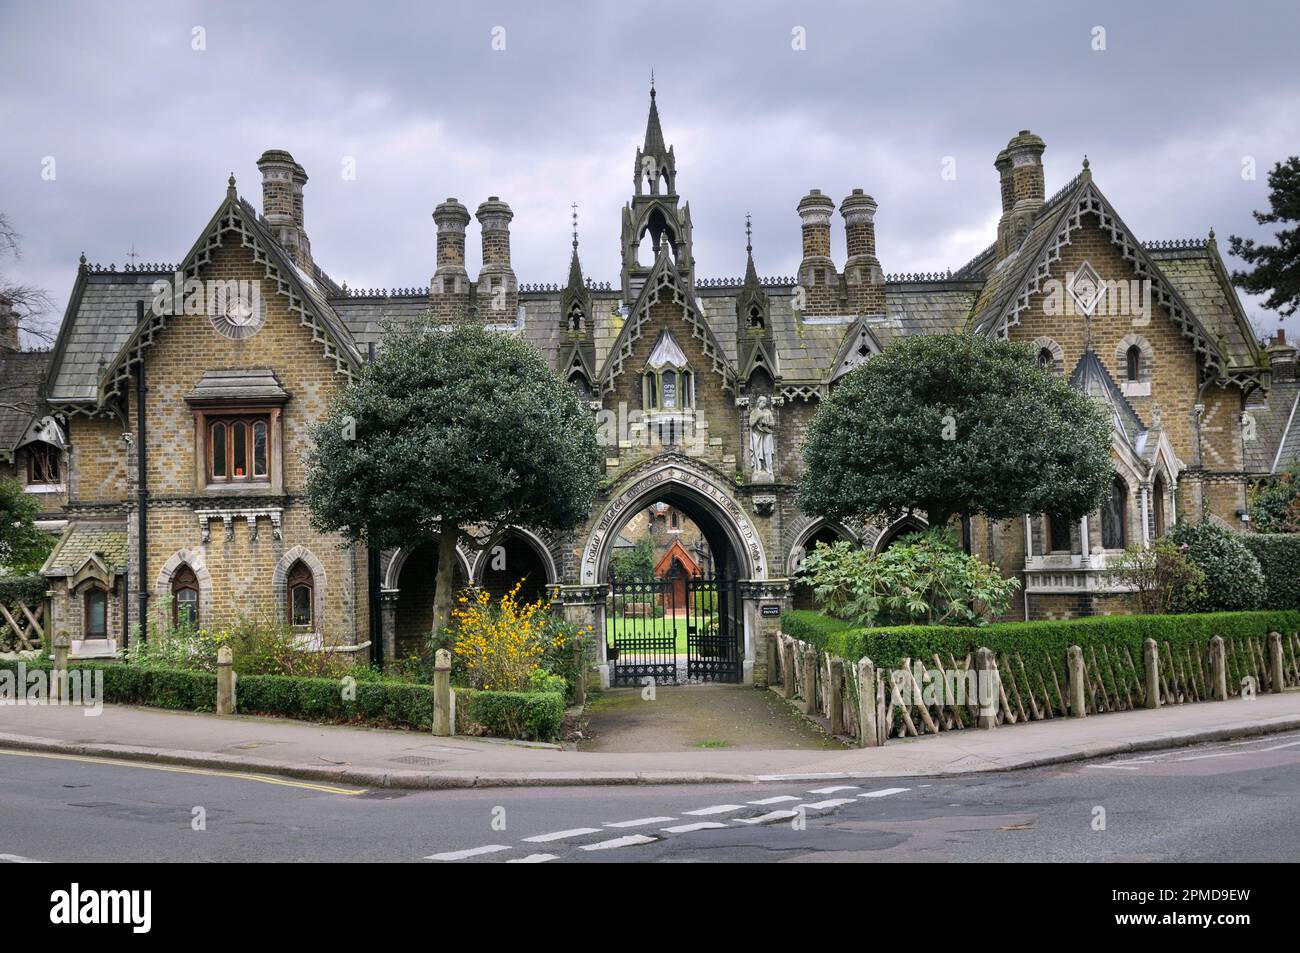 Holly Village, Highgate, London, UK.  Grade II-listed Victorian gothic built in 1865 for Angela Burdett-Coutts the second richest woman in England. Stock Photo